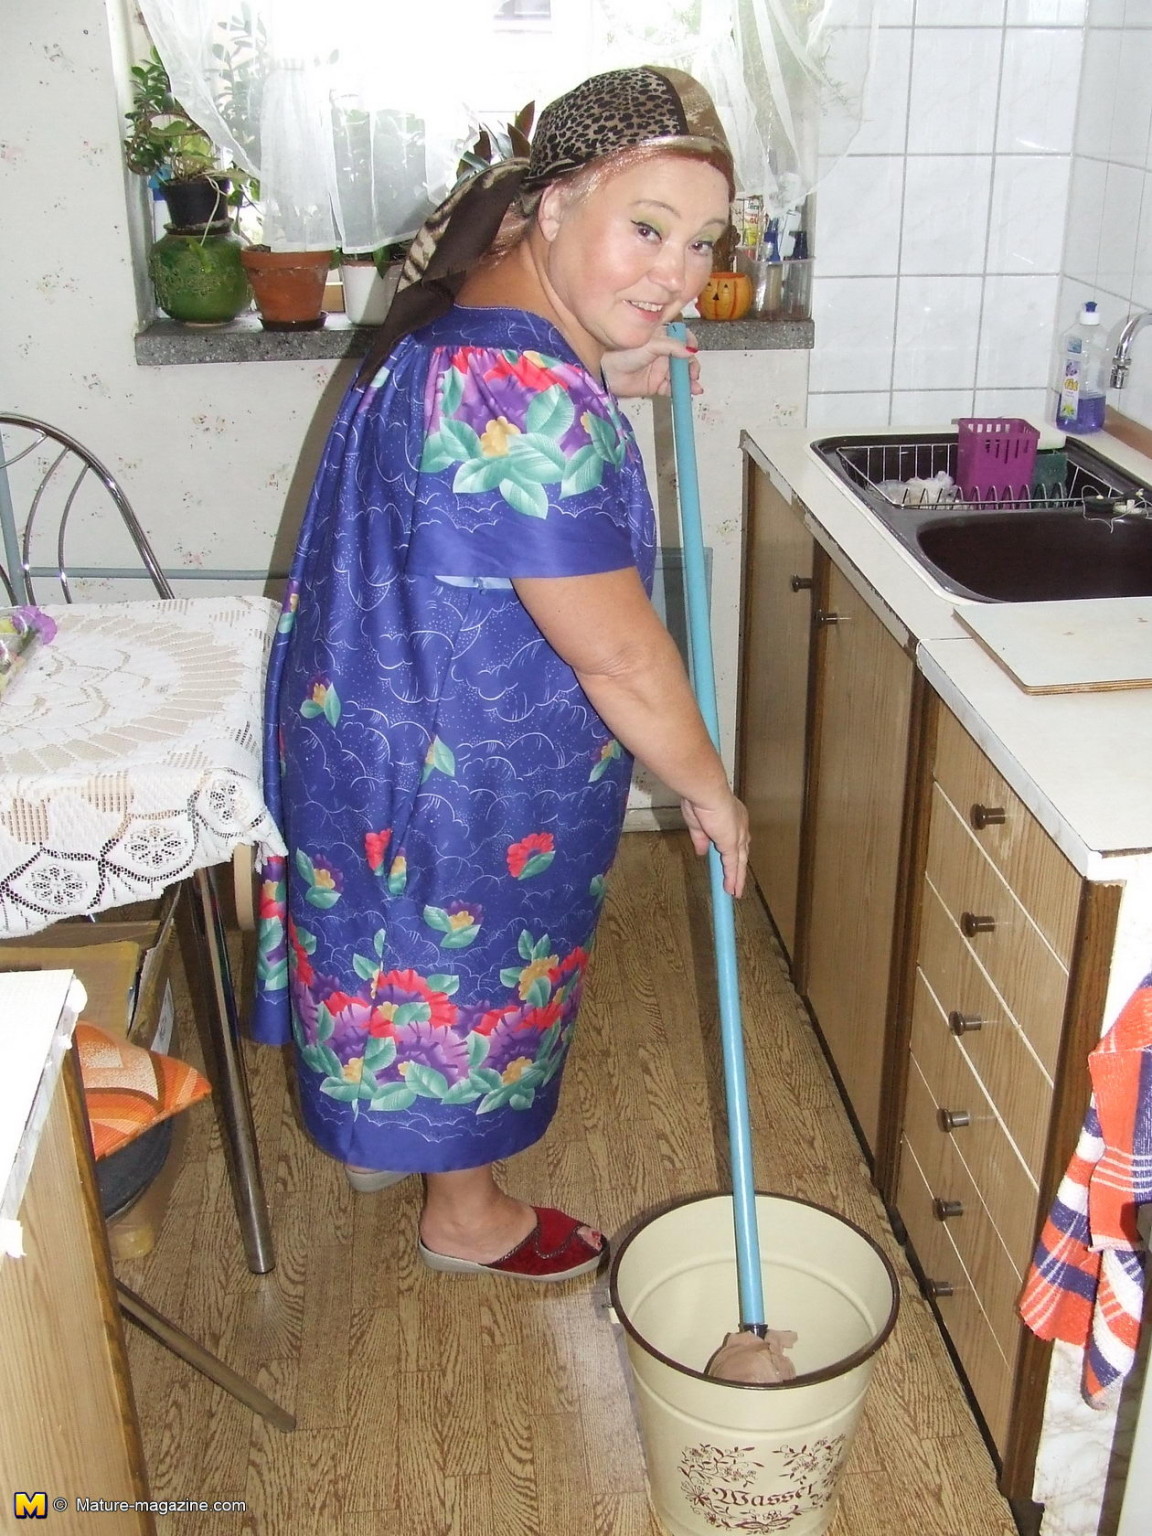 Mature cleaning lady makes it dirty #67298621